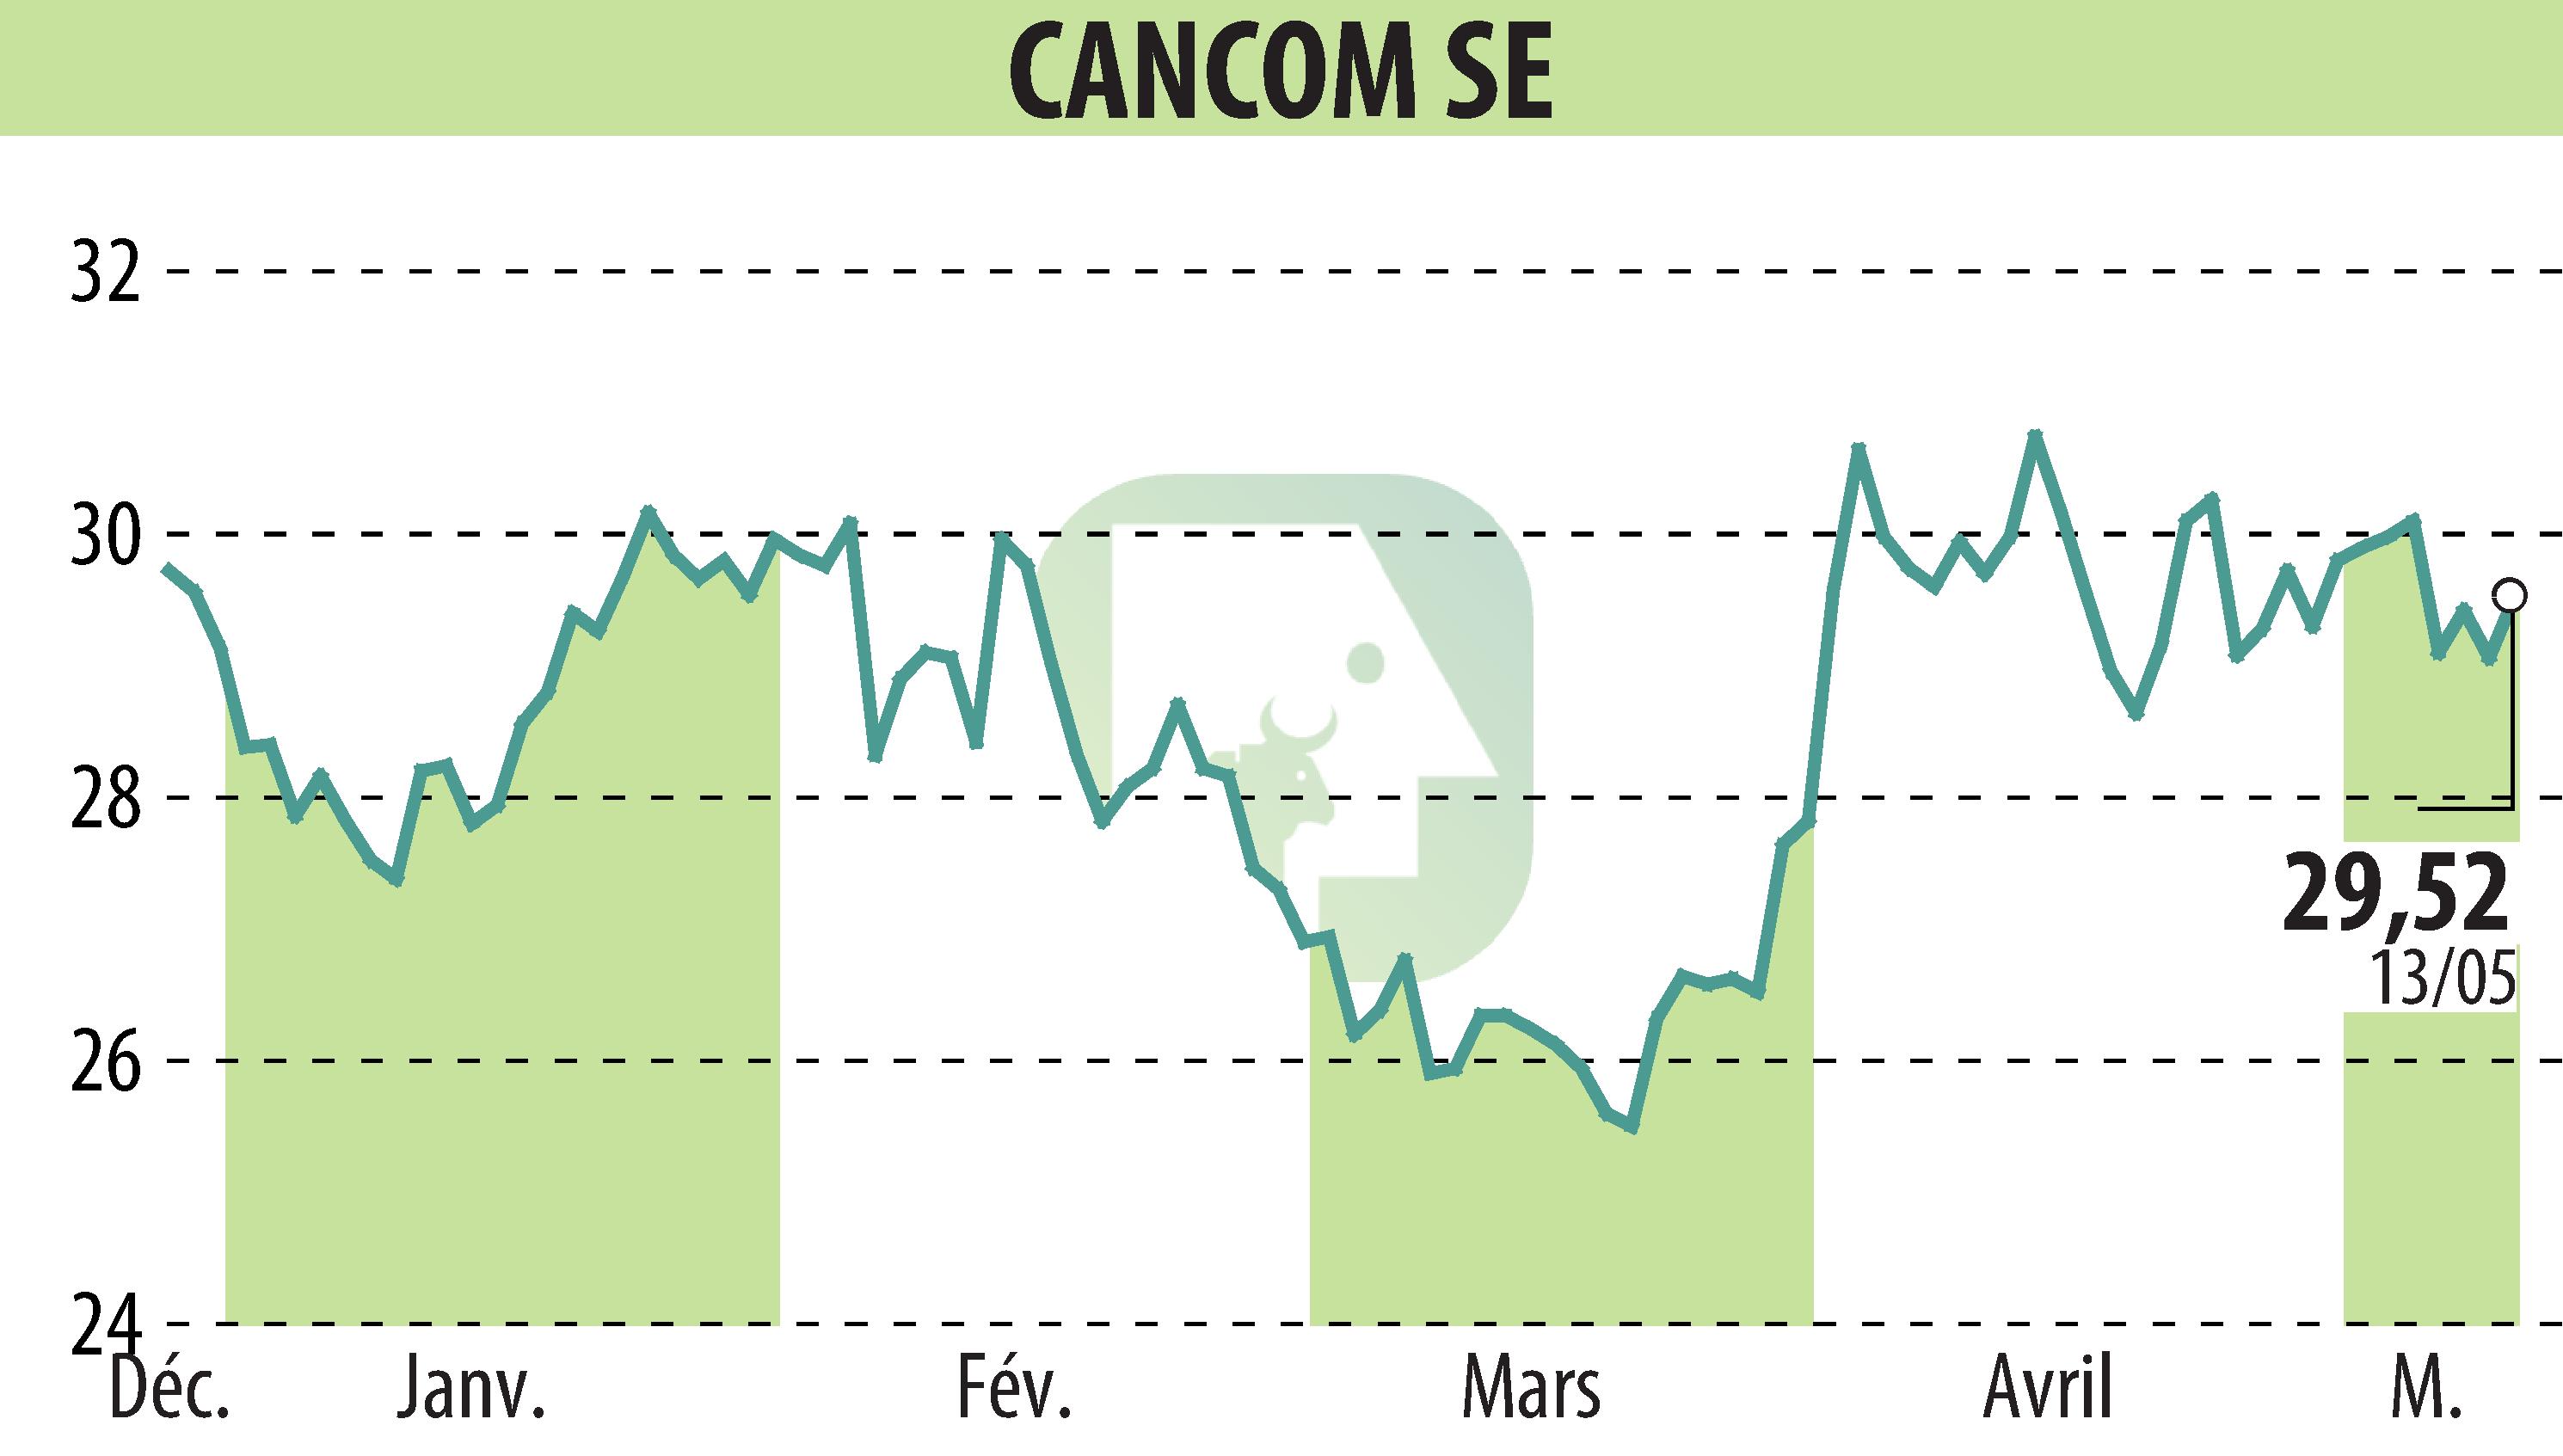 Stock price chart of CANCOM SE (EBR:COK) showing fluctuations.